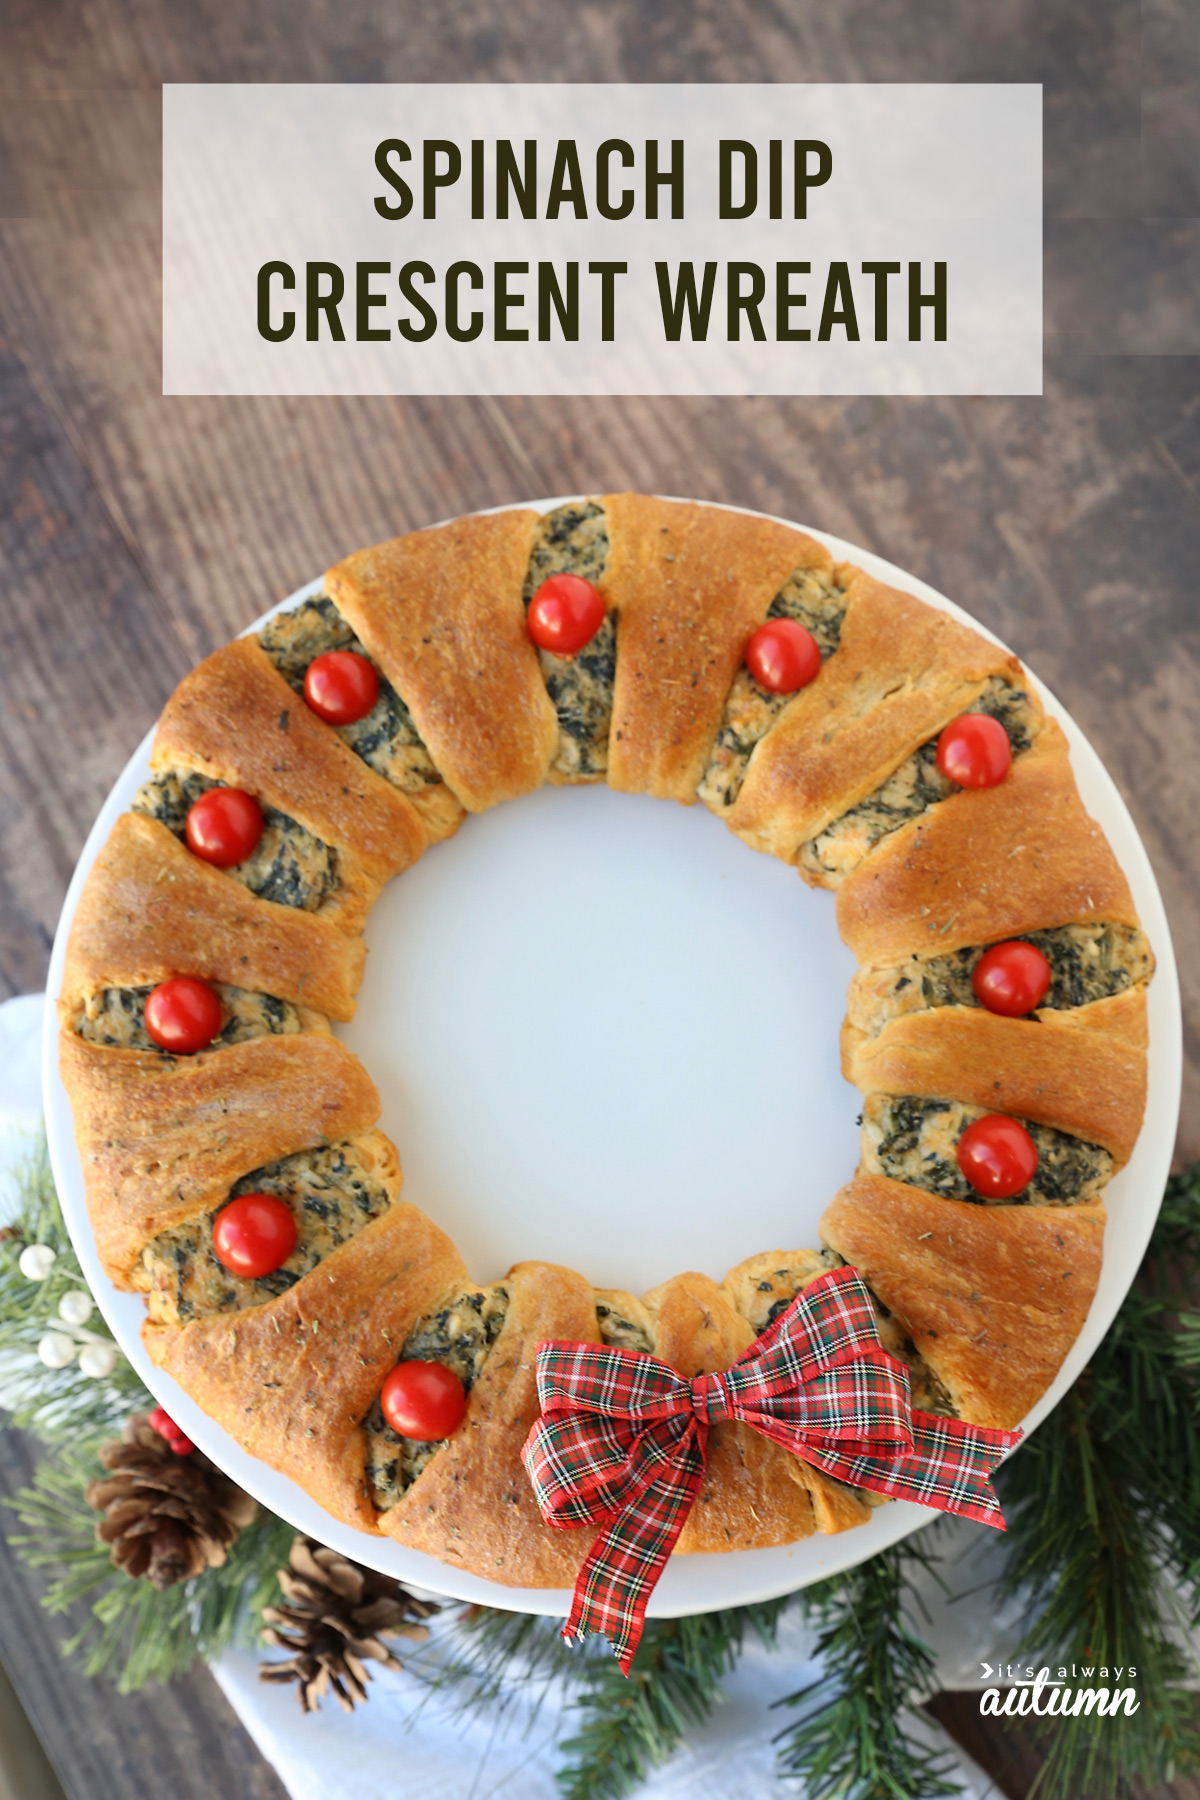 Spinach dip crescent wreath is a gorgeous holiday appetizer - perfect for Christmas parties!